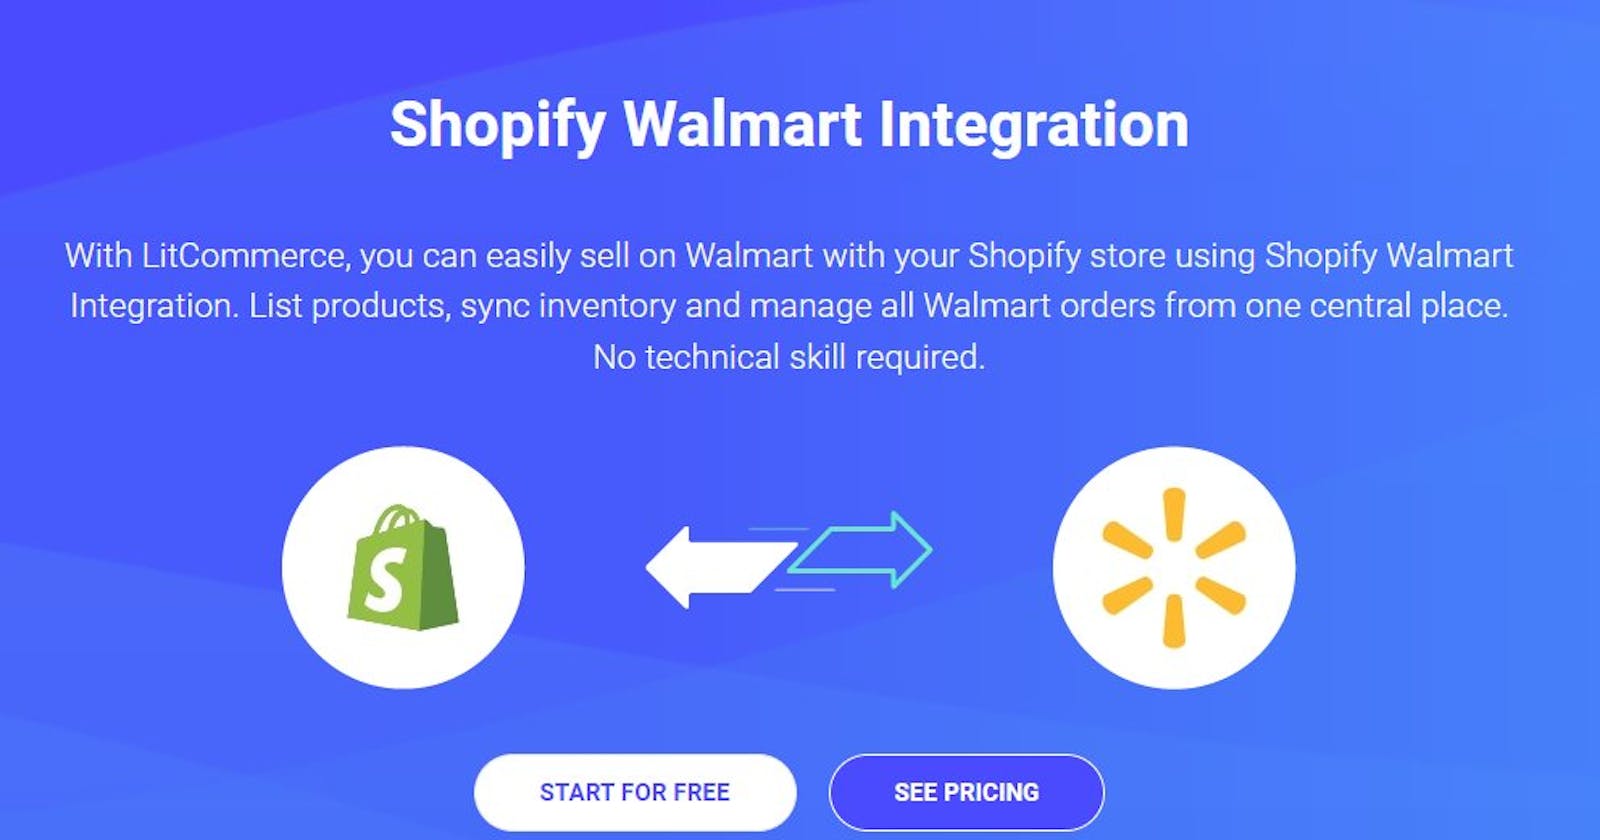 What apps can you integrate Shopify with Walmart?